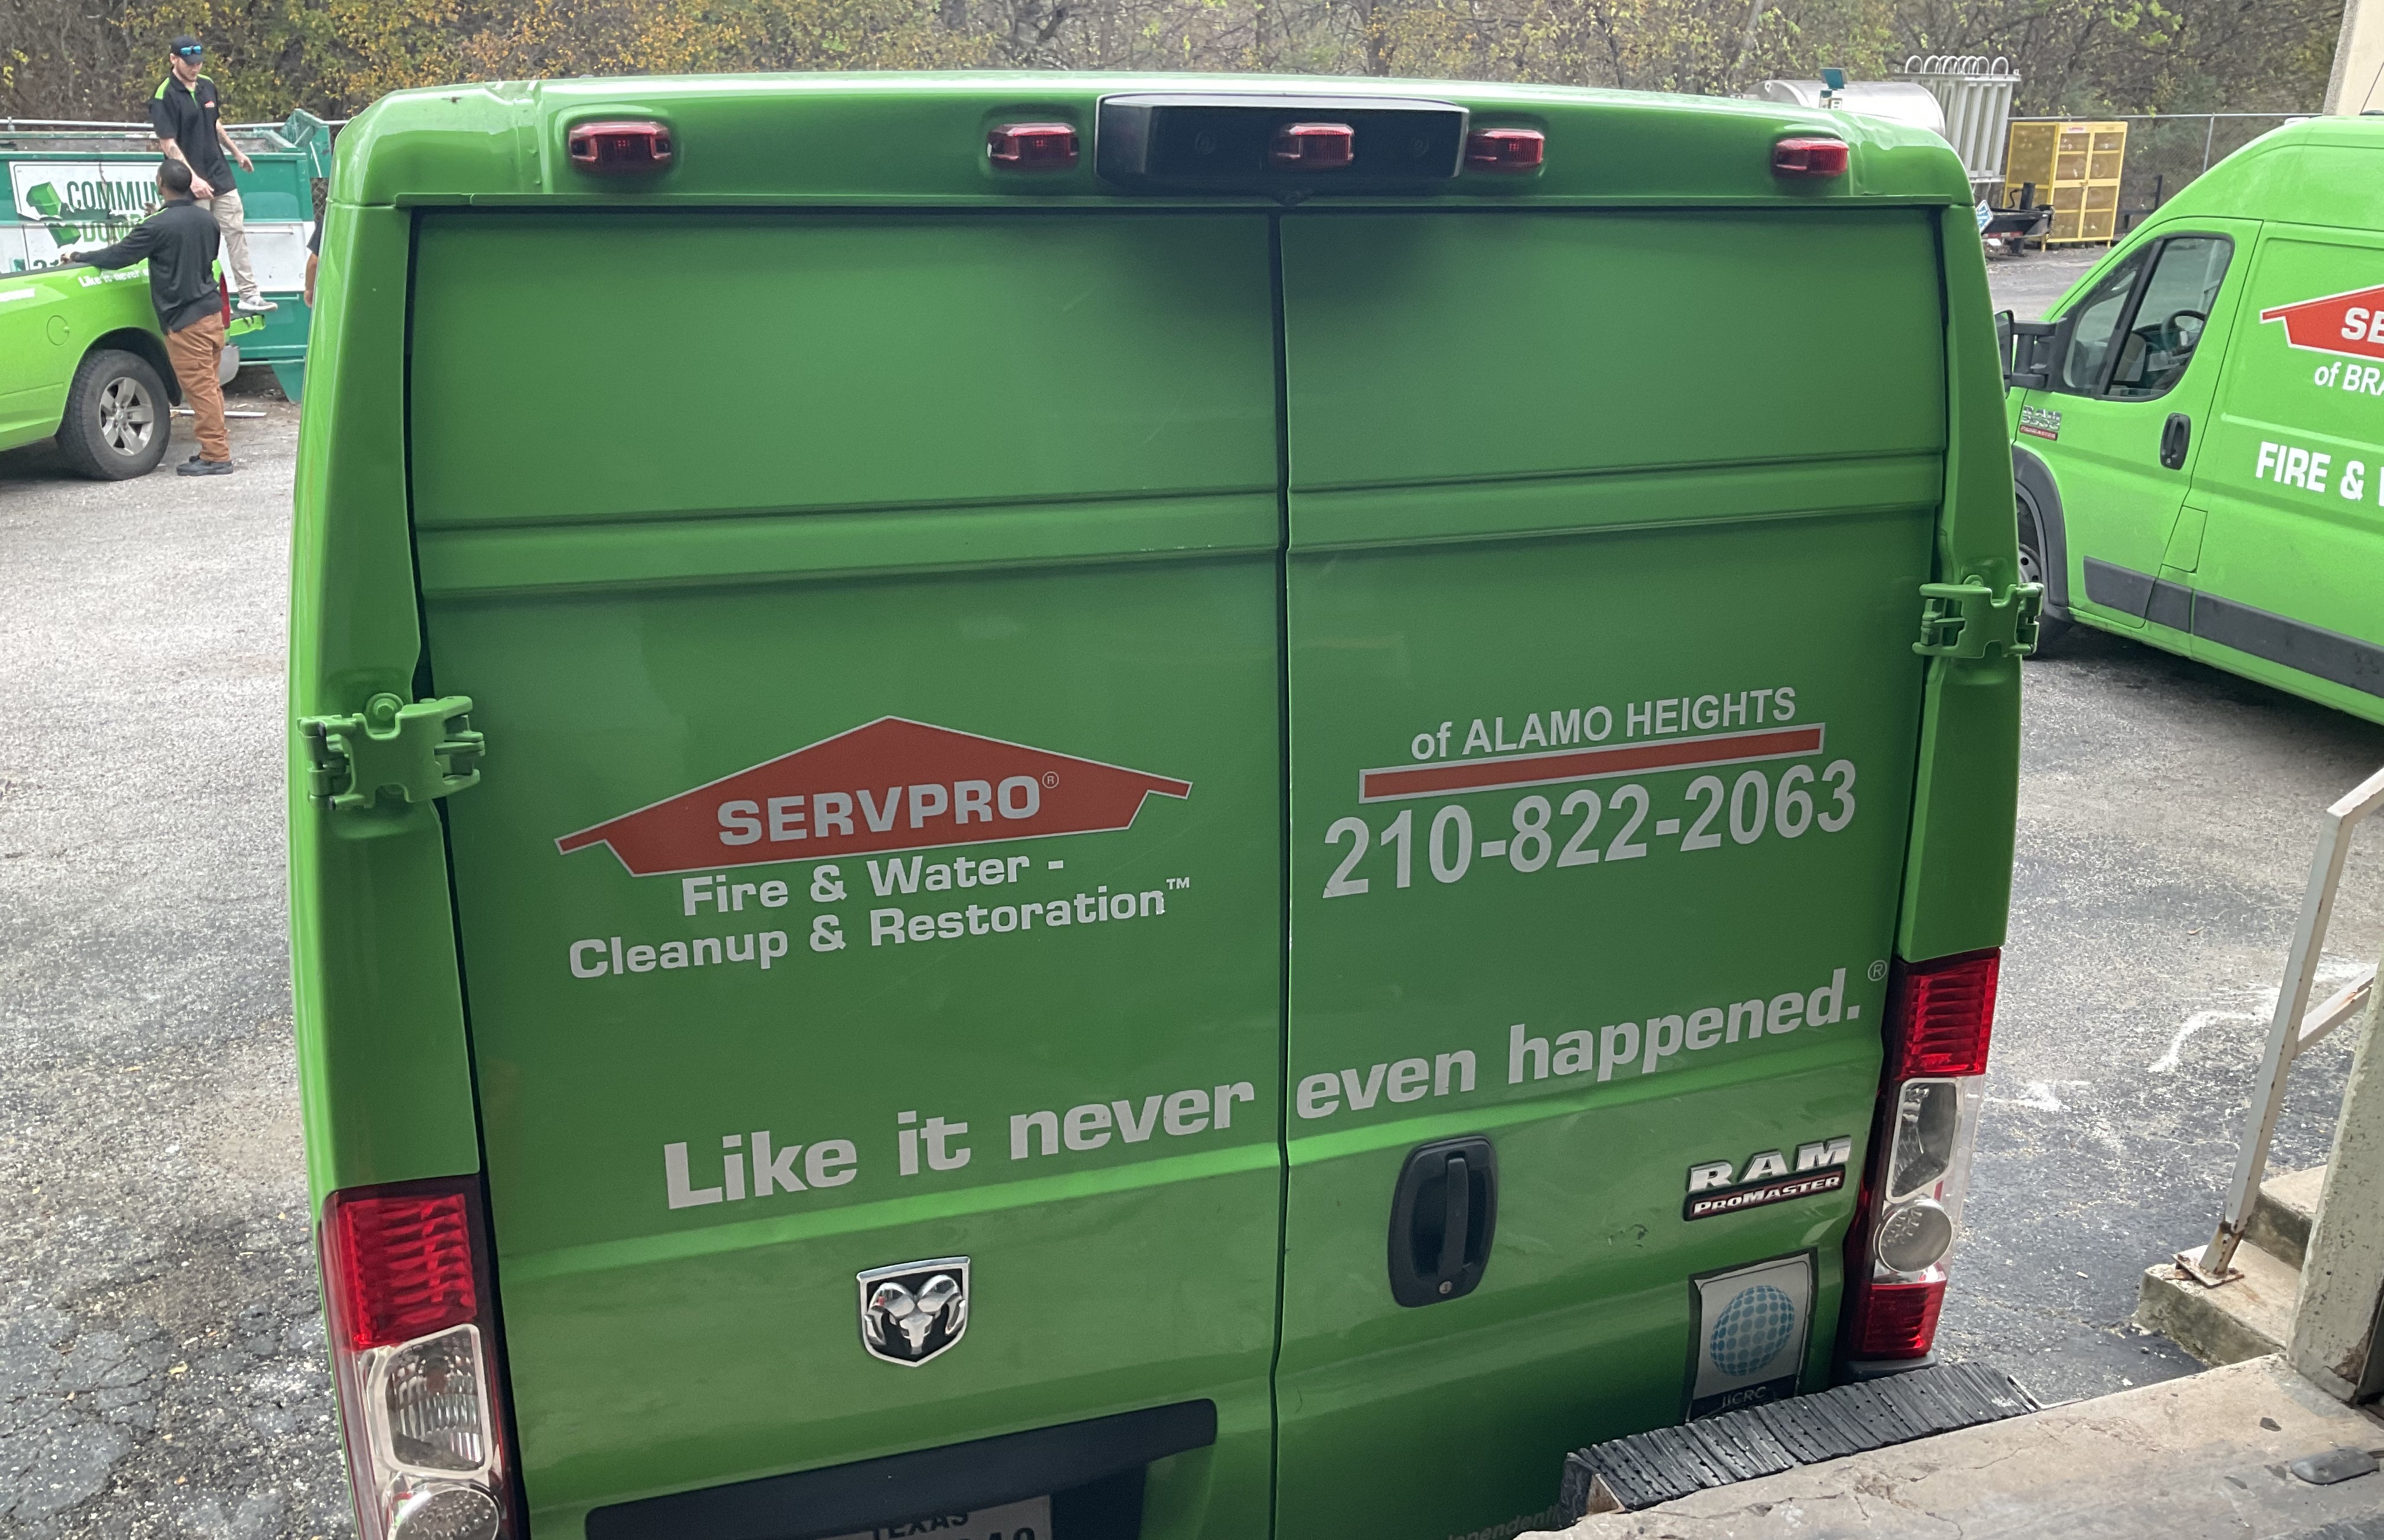 Here is what the back of our SERVPRO of Alamo Heights vans look like.